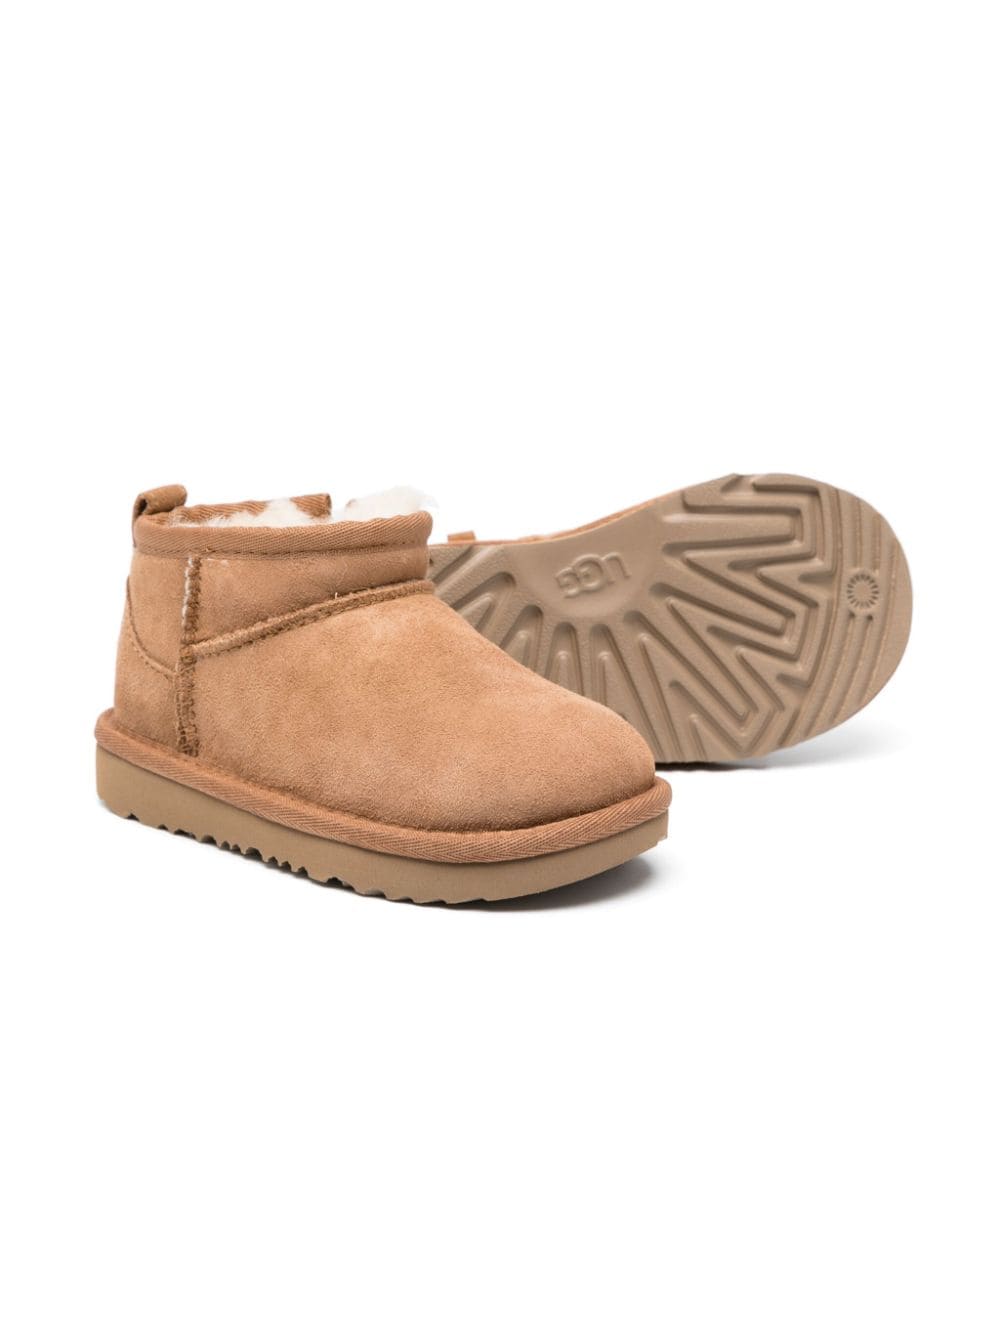 Shop Ugg Classic Ultra Mini Suede Boots In Brown